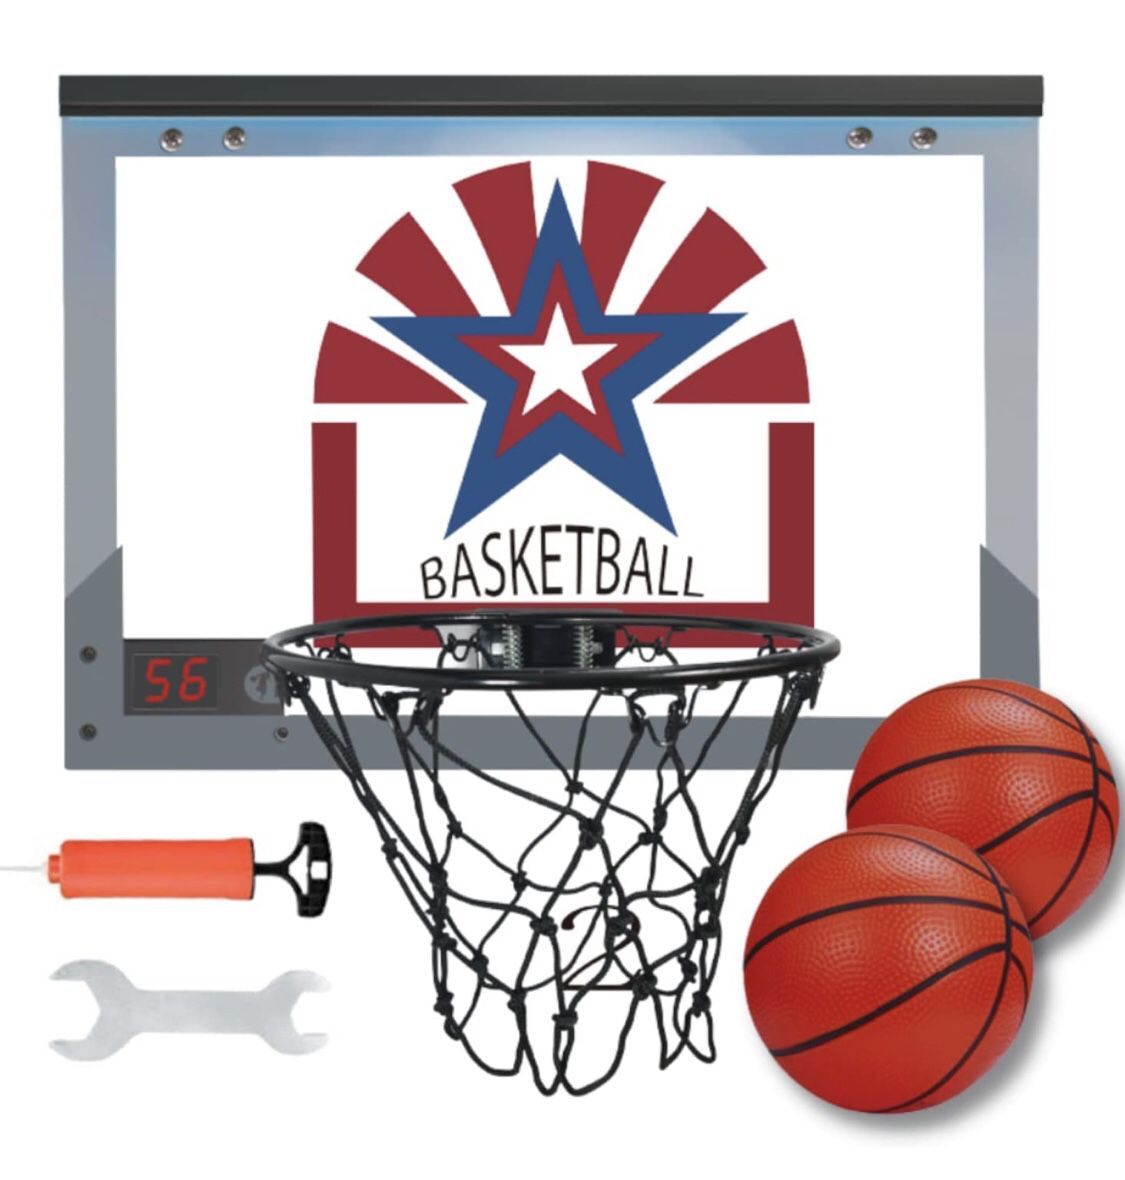 Brand NEW Kavalan Indoor Mini Basketball Hoop with Electronic Scoreboard - for Door and with Complete Basketball Accessories